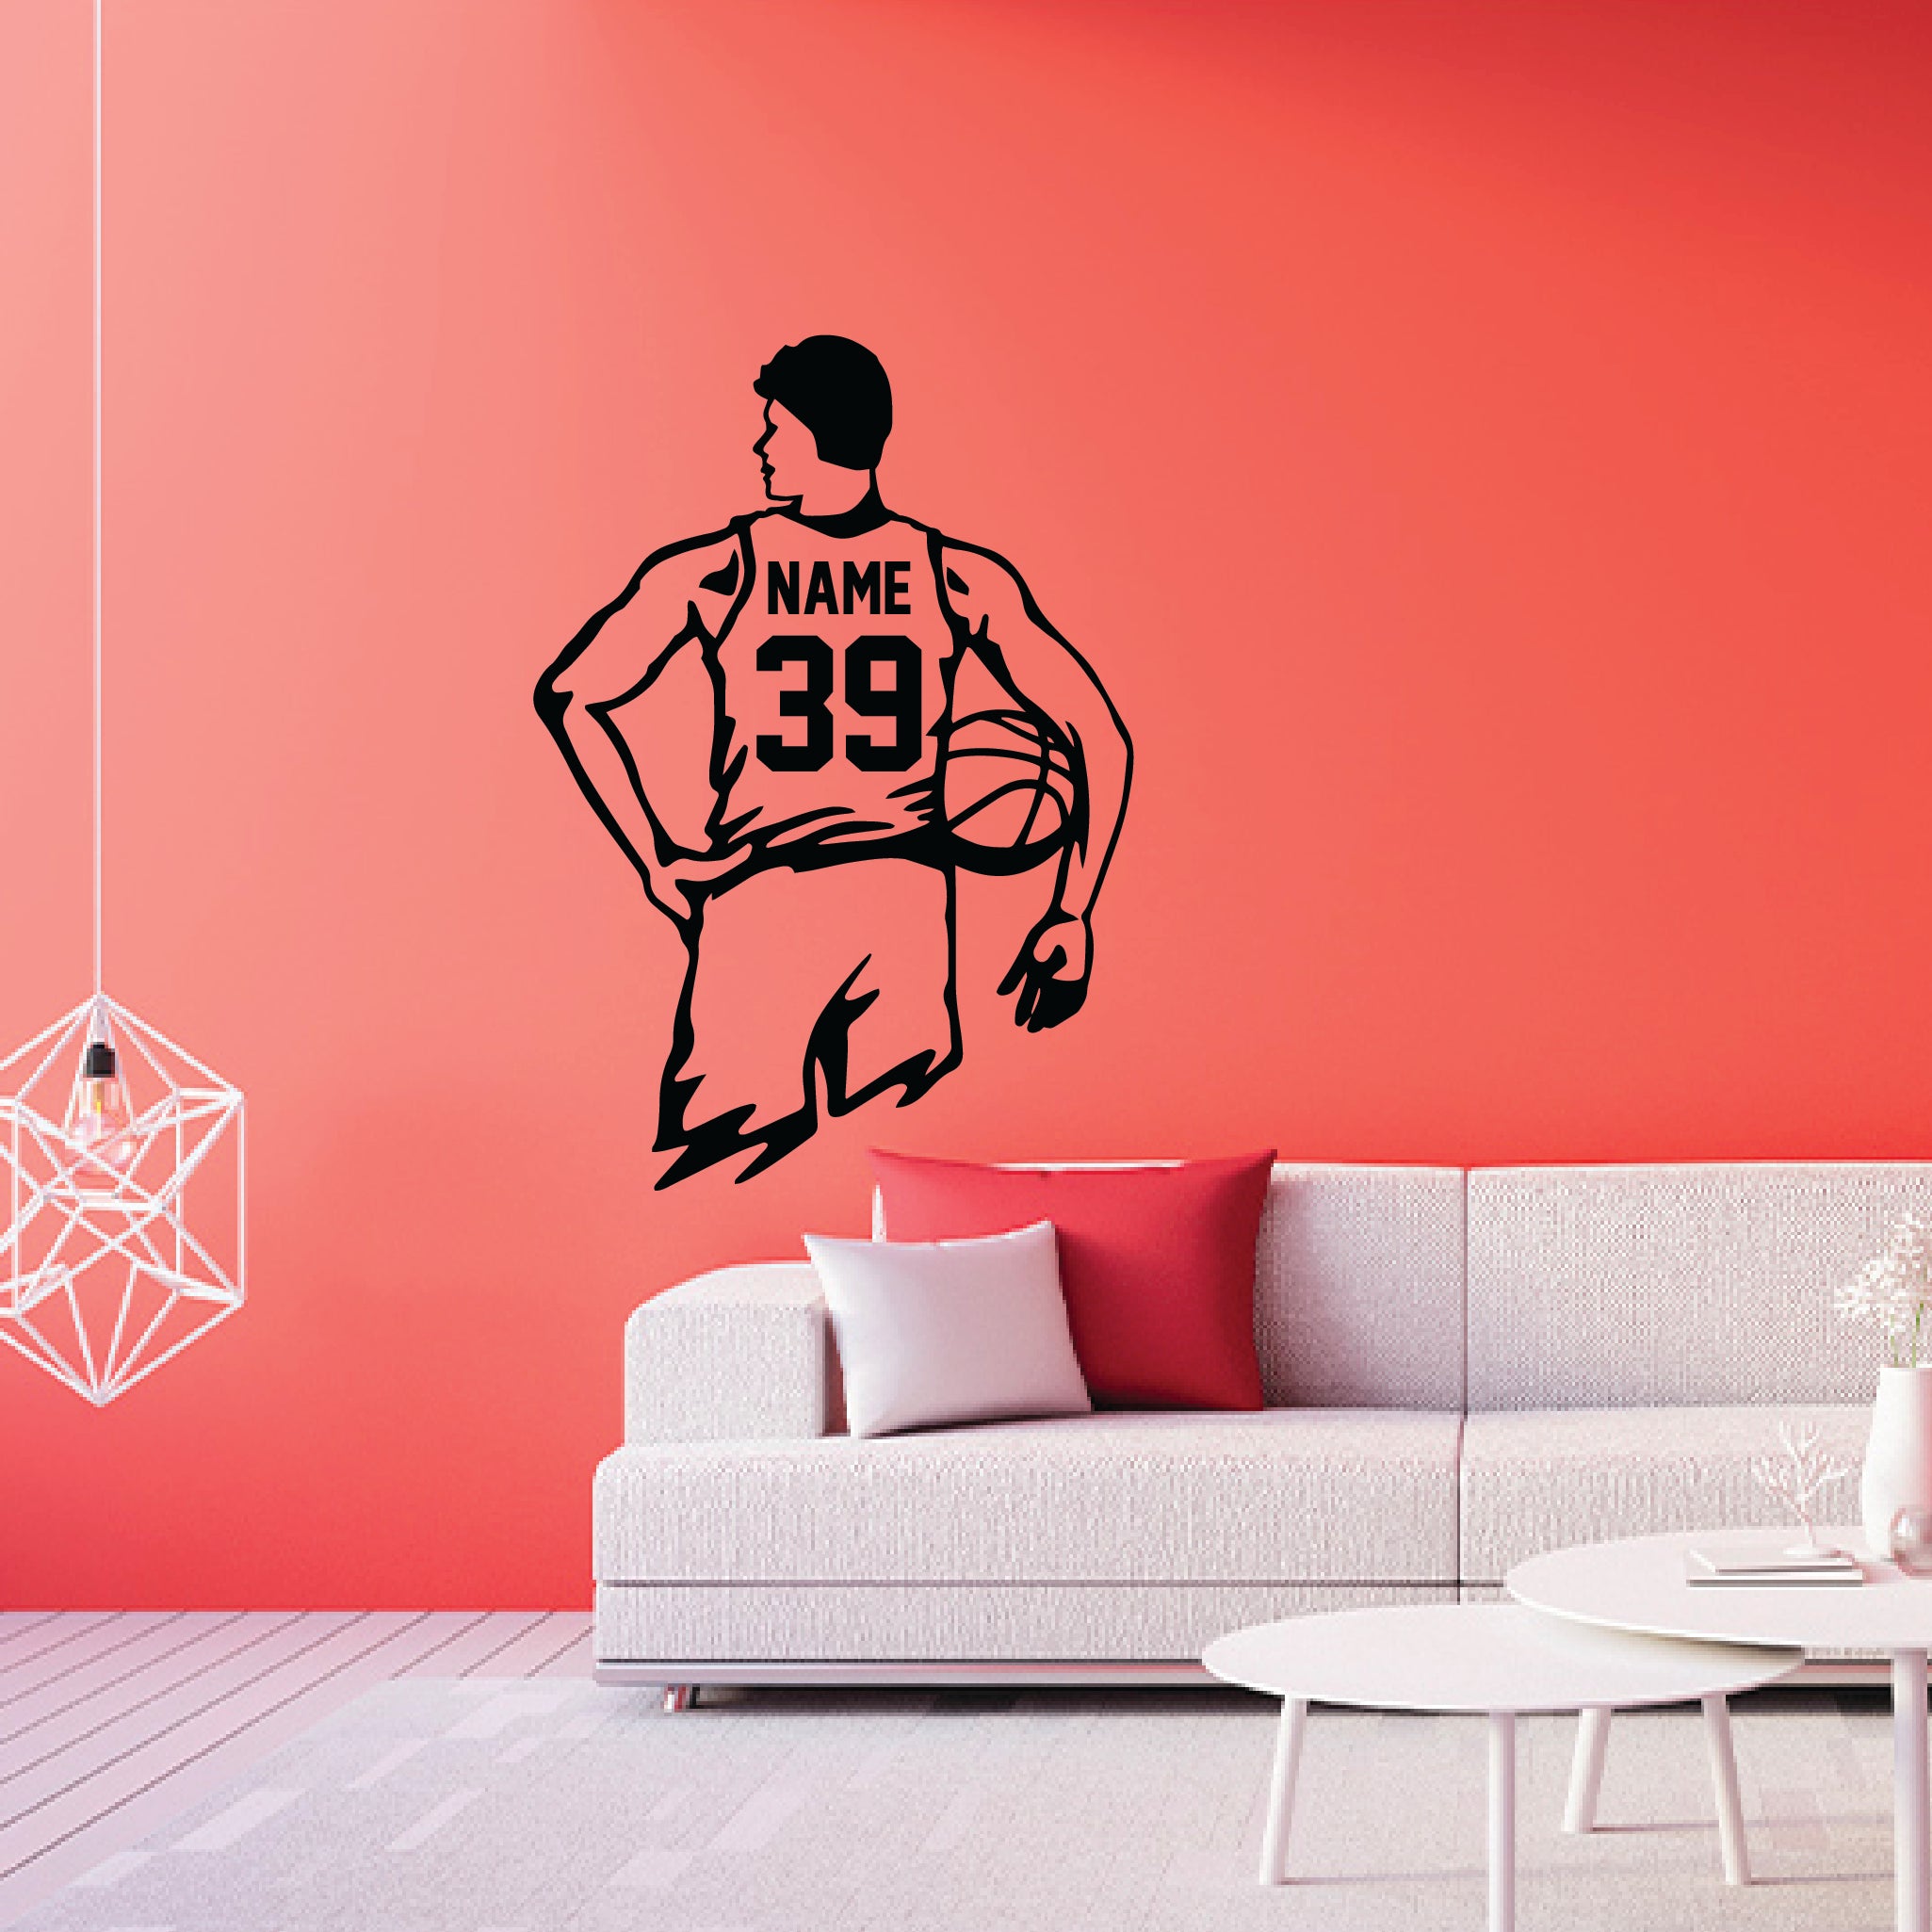 Personalized Basketball Player Wall Decal Sportesi